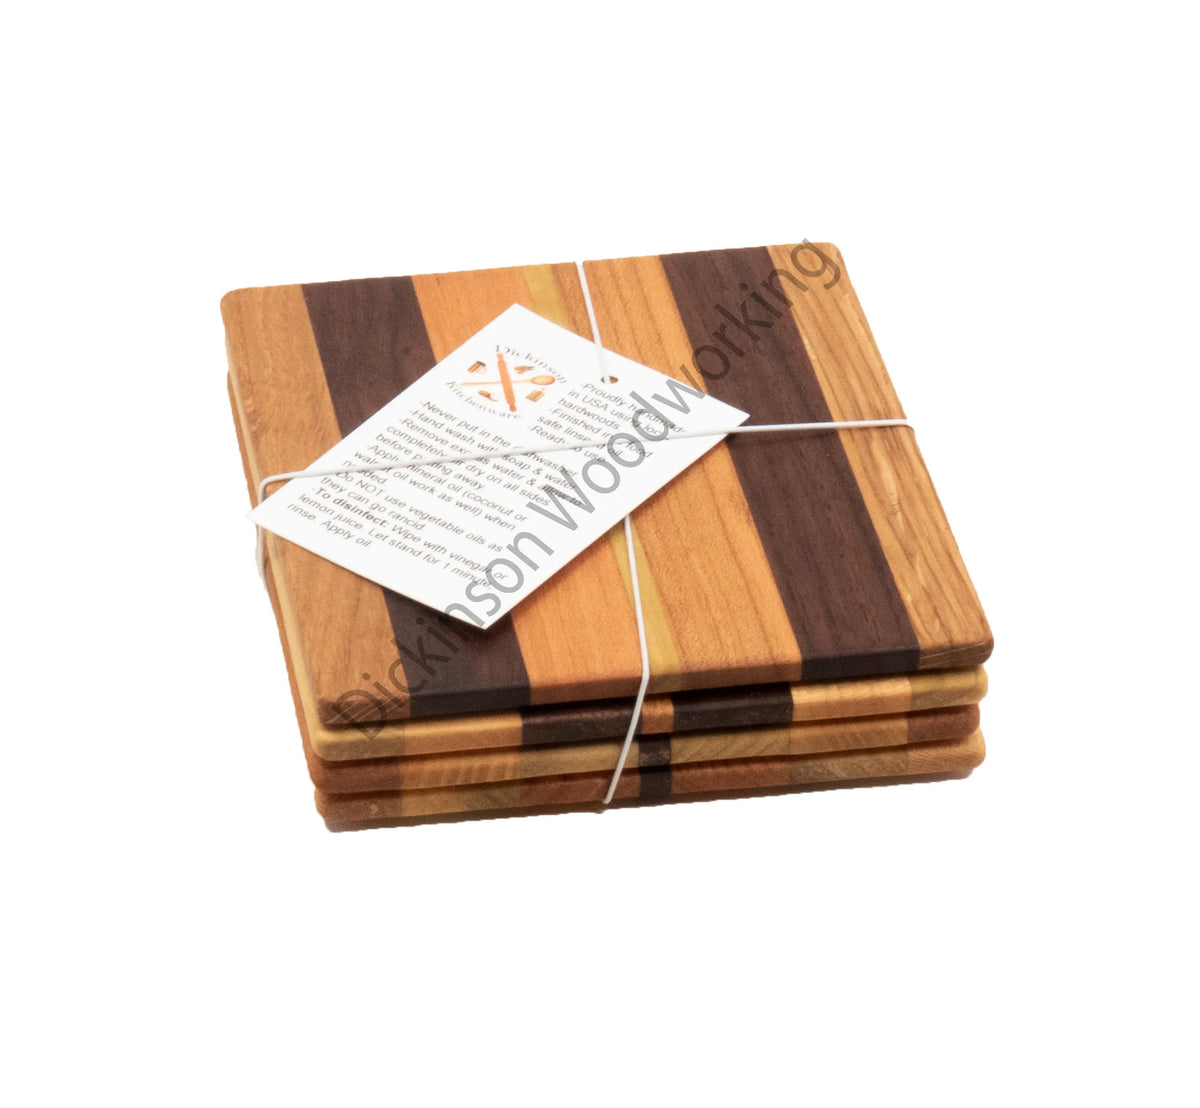 Wood Patterned Coasters - Set of 4